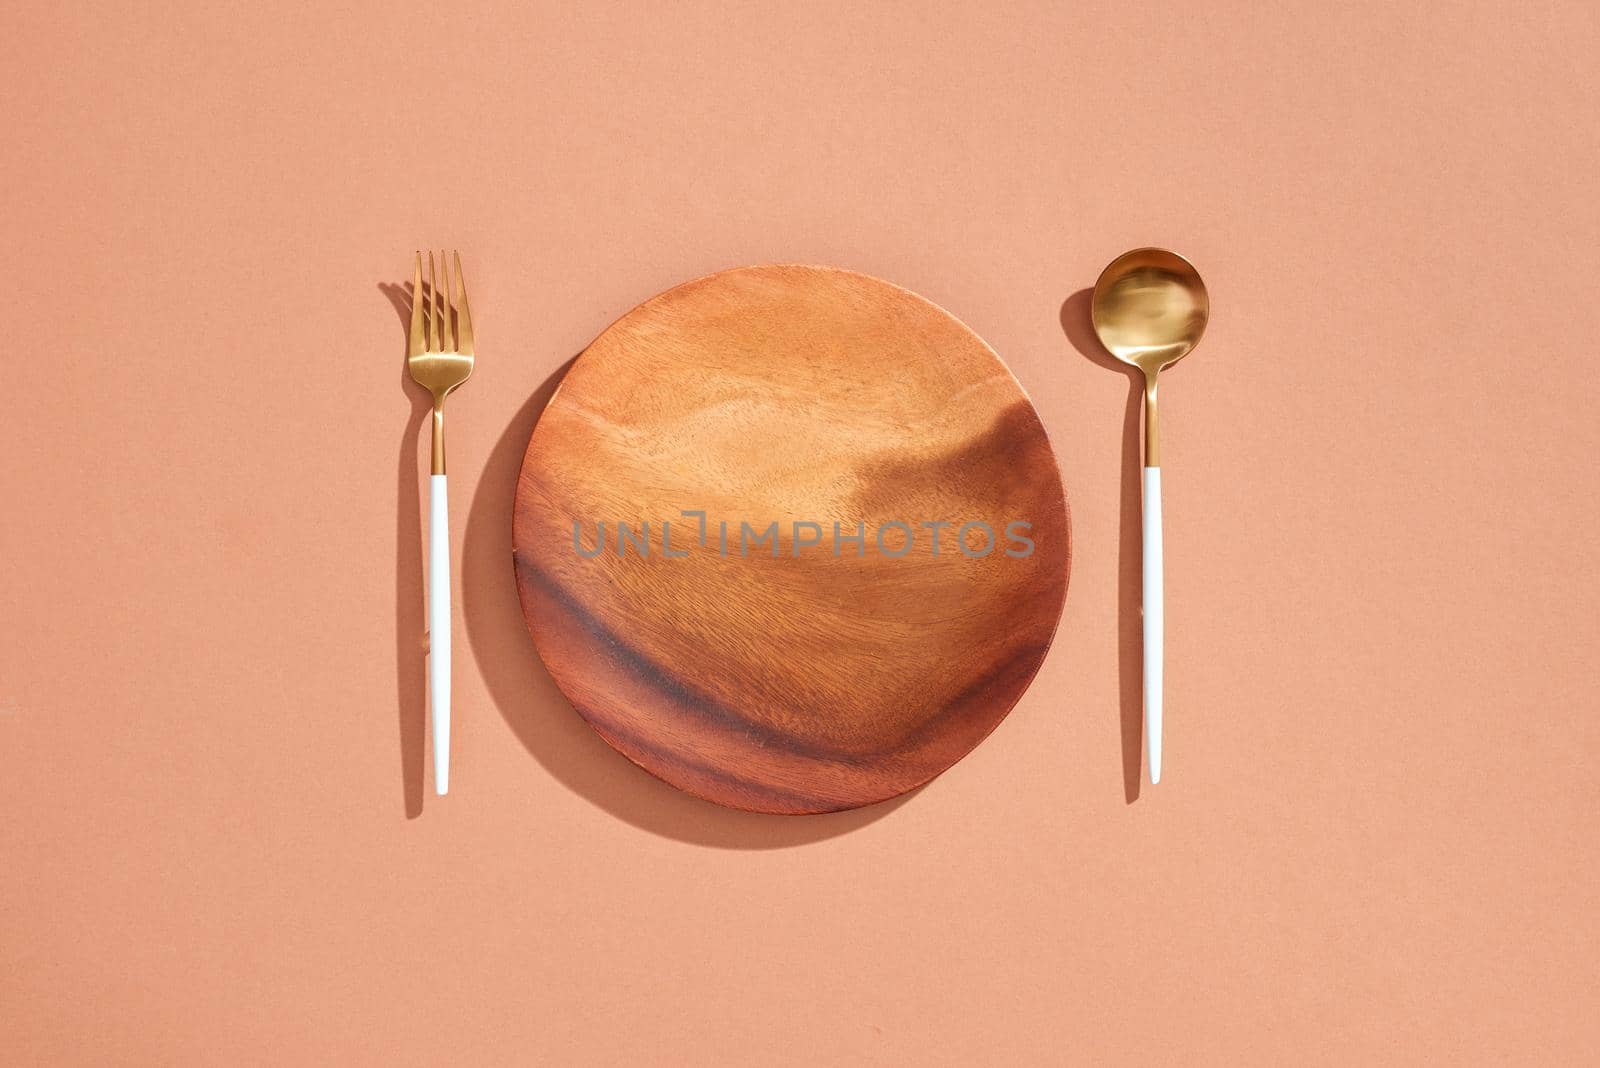 Knife and fork on wooden plate isolated on beige background with copy space  by makidotvn